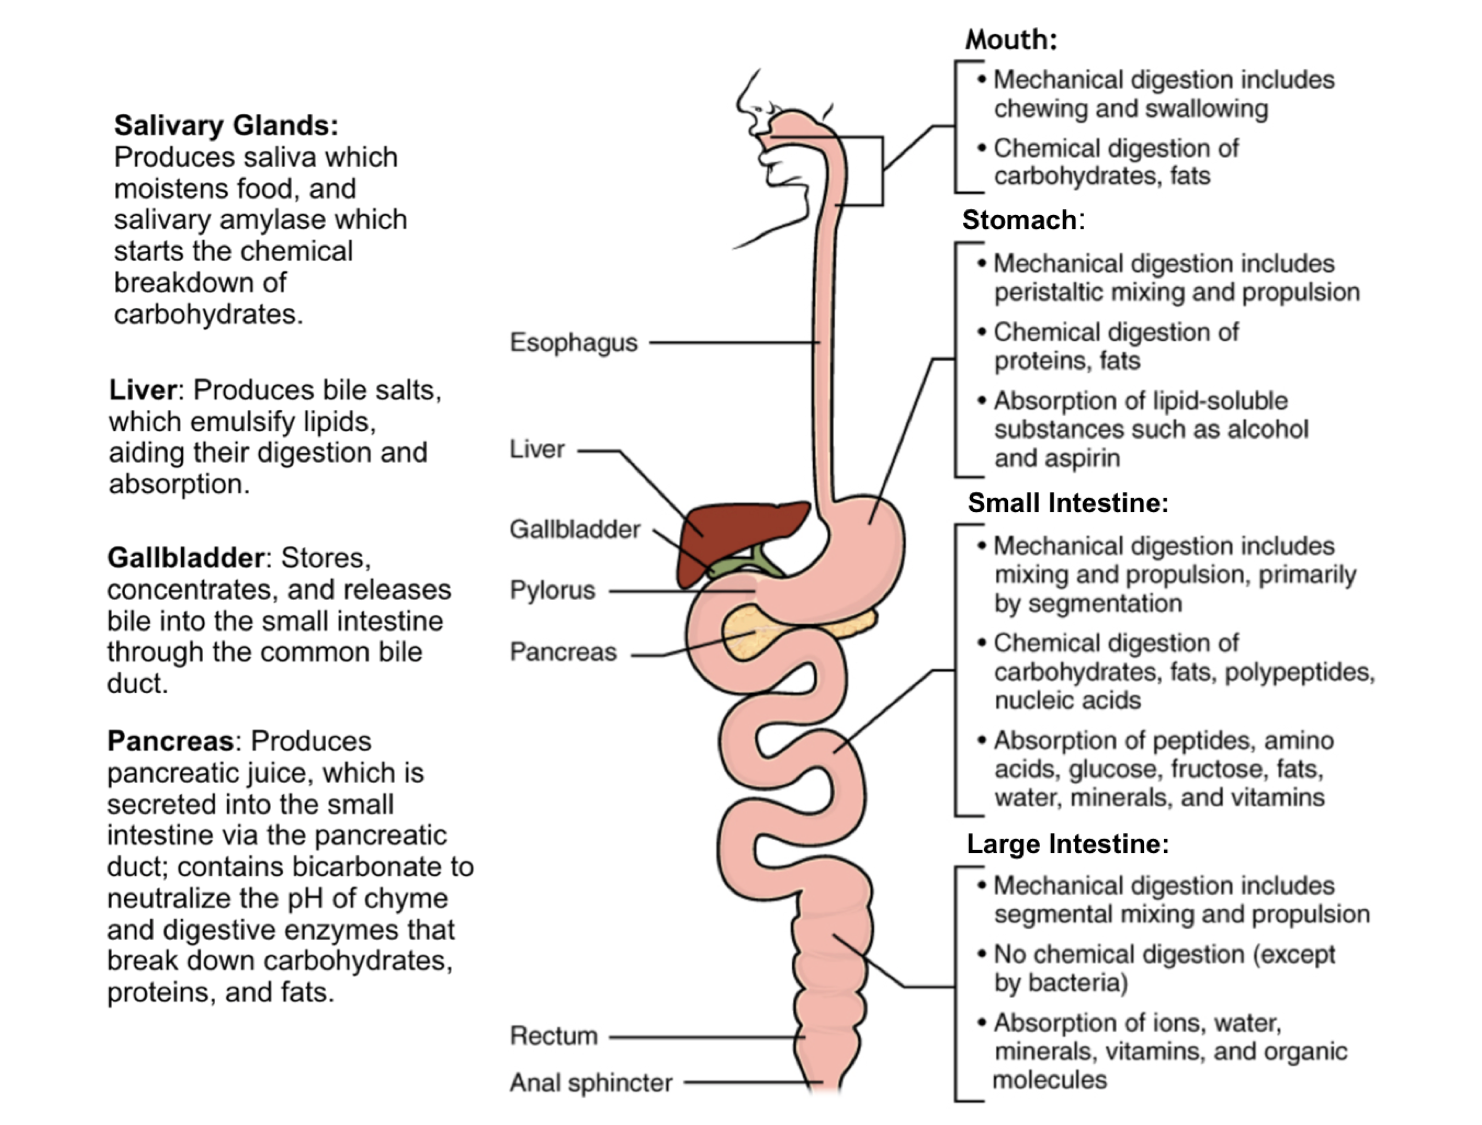 This image shows that the GI tract is one continuous tube starting at the mouth and ending at the anus. The salivary glands, liver, gallbladder, and pancreas are accessory organs that have ducts that feed into the GI tract. Next to each organ, a text callout identifies how each organ participates in mechanical digestion, chemical digestion and absorption.